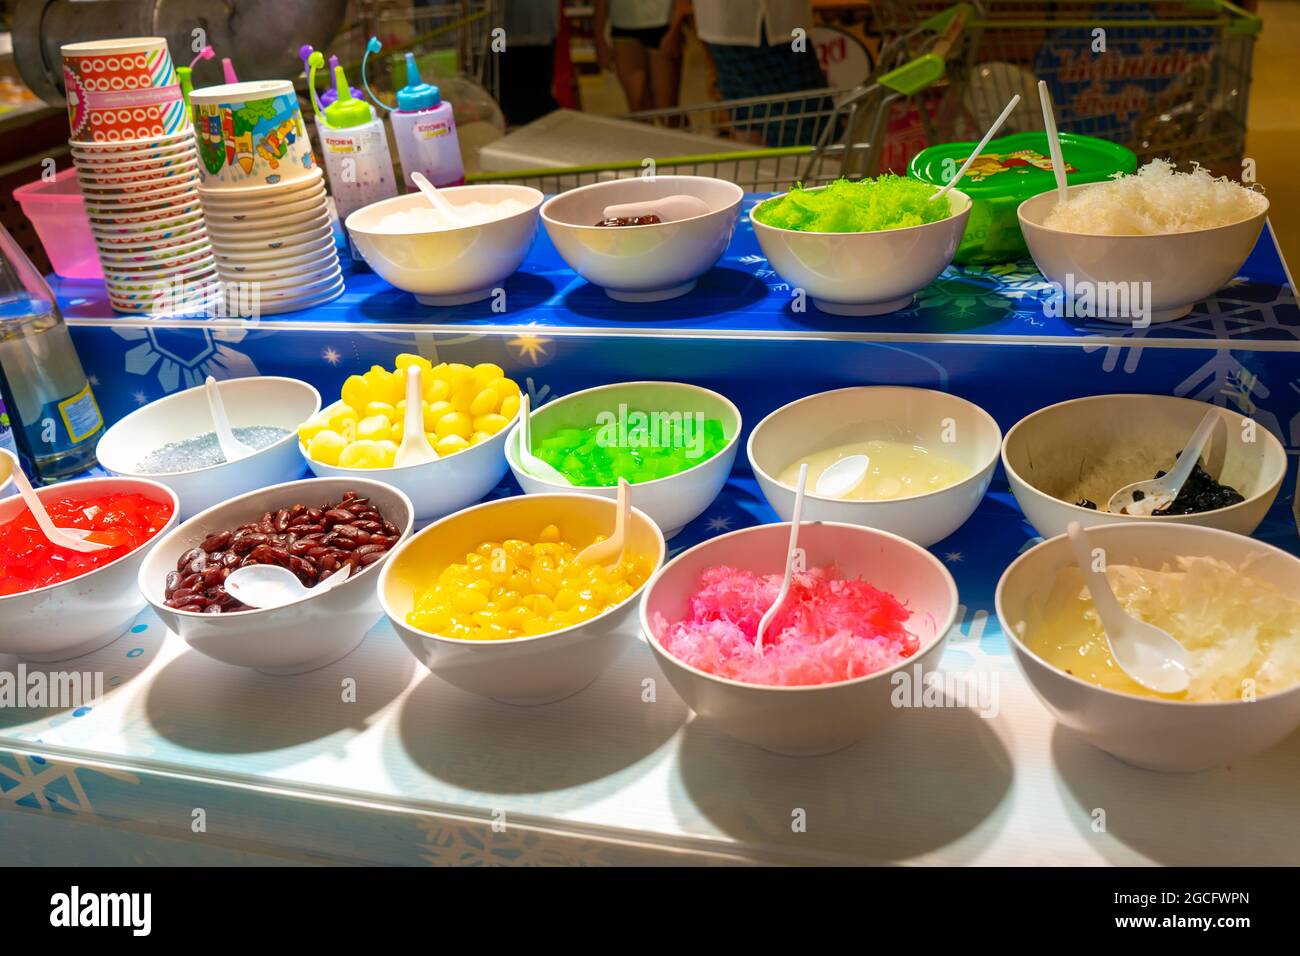 Street counter selling ice cream with different flavors. Stock Photo